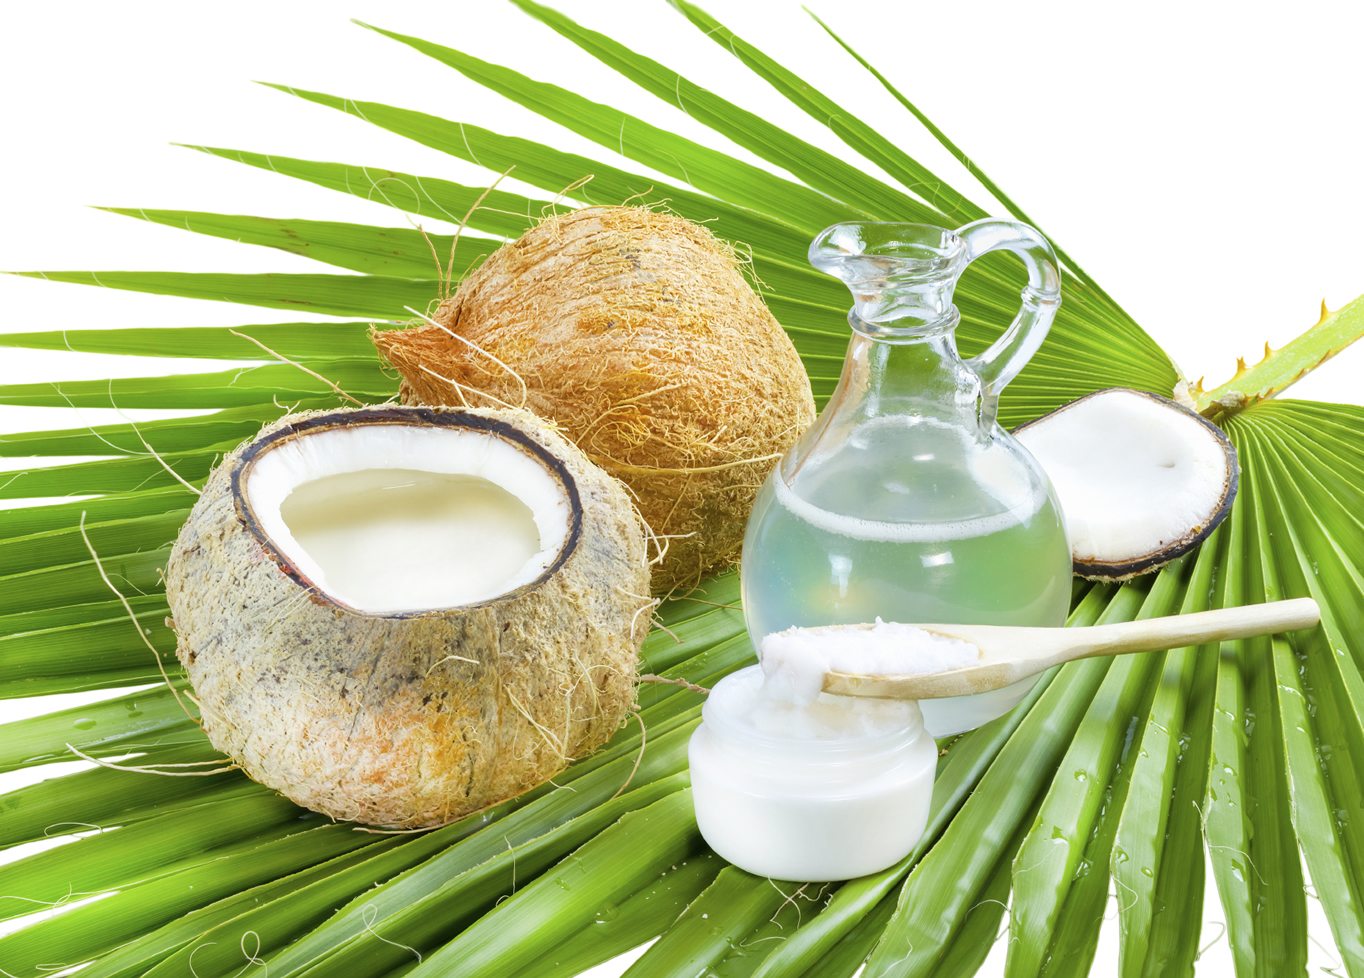 how to eat coconut oil for weight loss